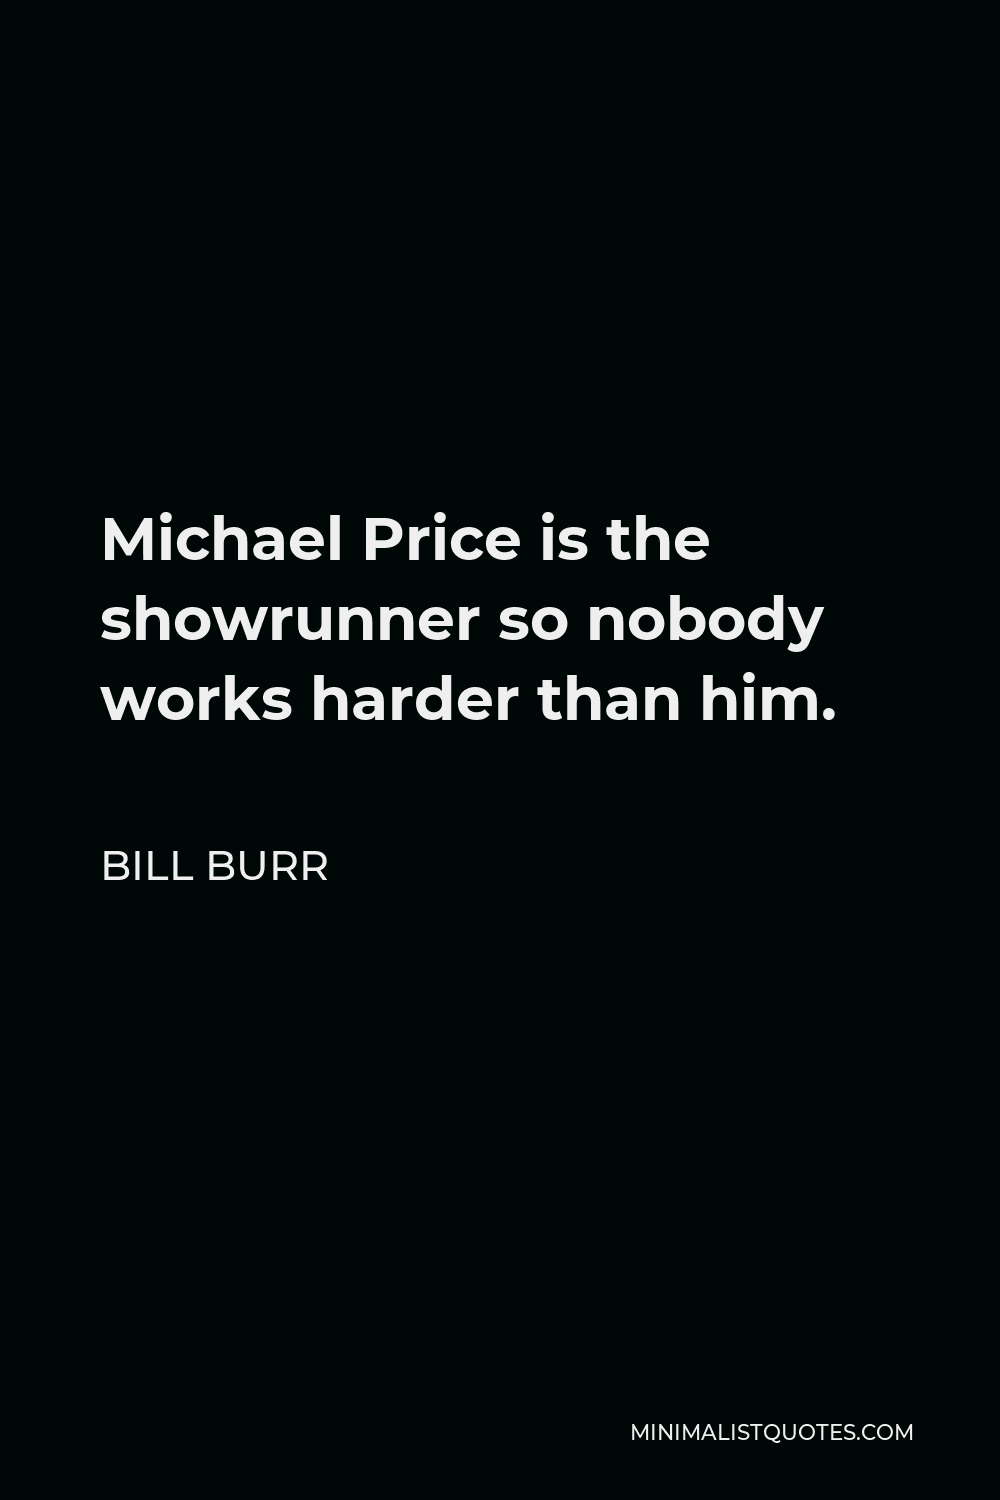 Bill Burr Quote - Michael Price is the showrunner so nobody works harder than him.